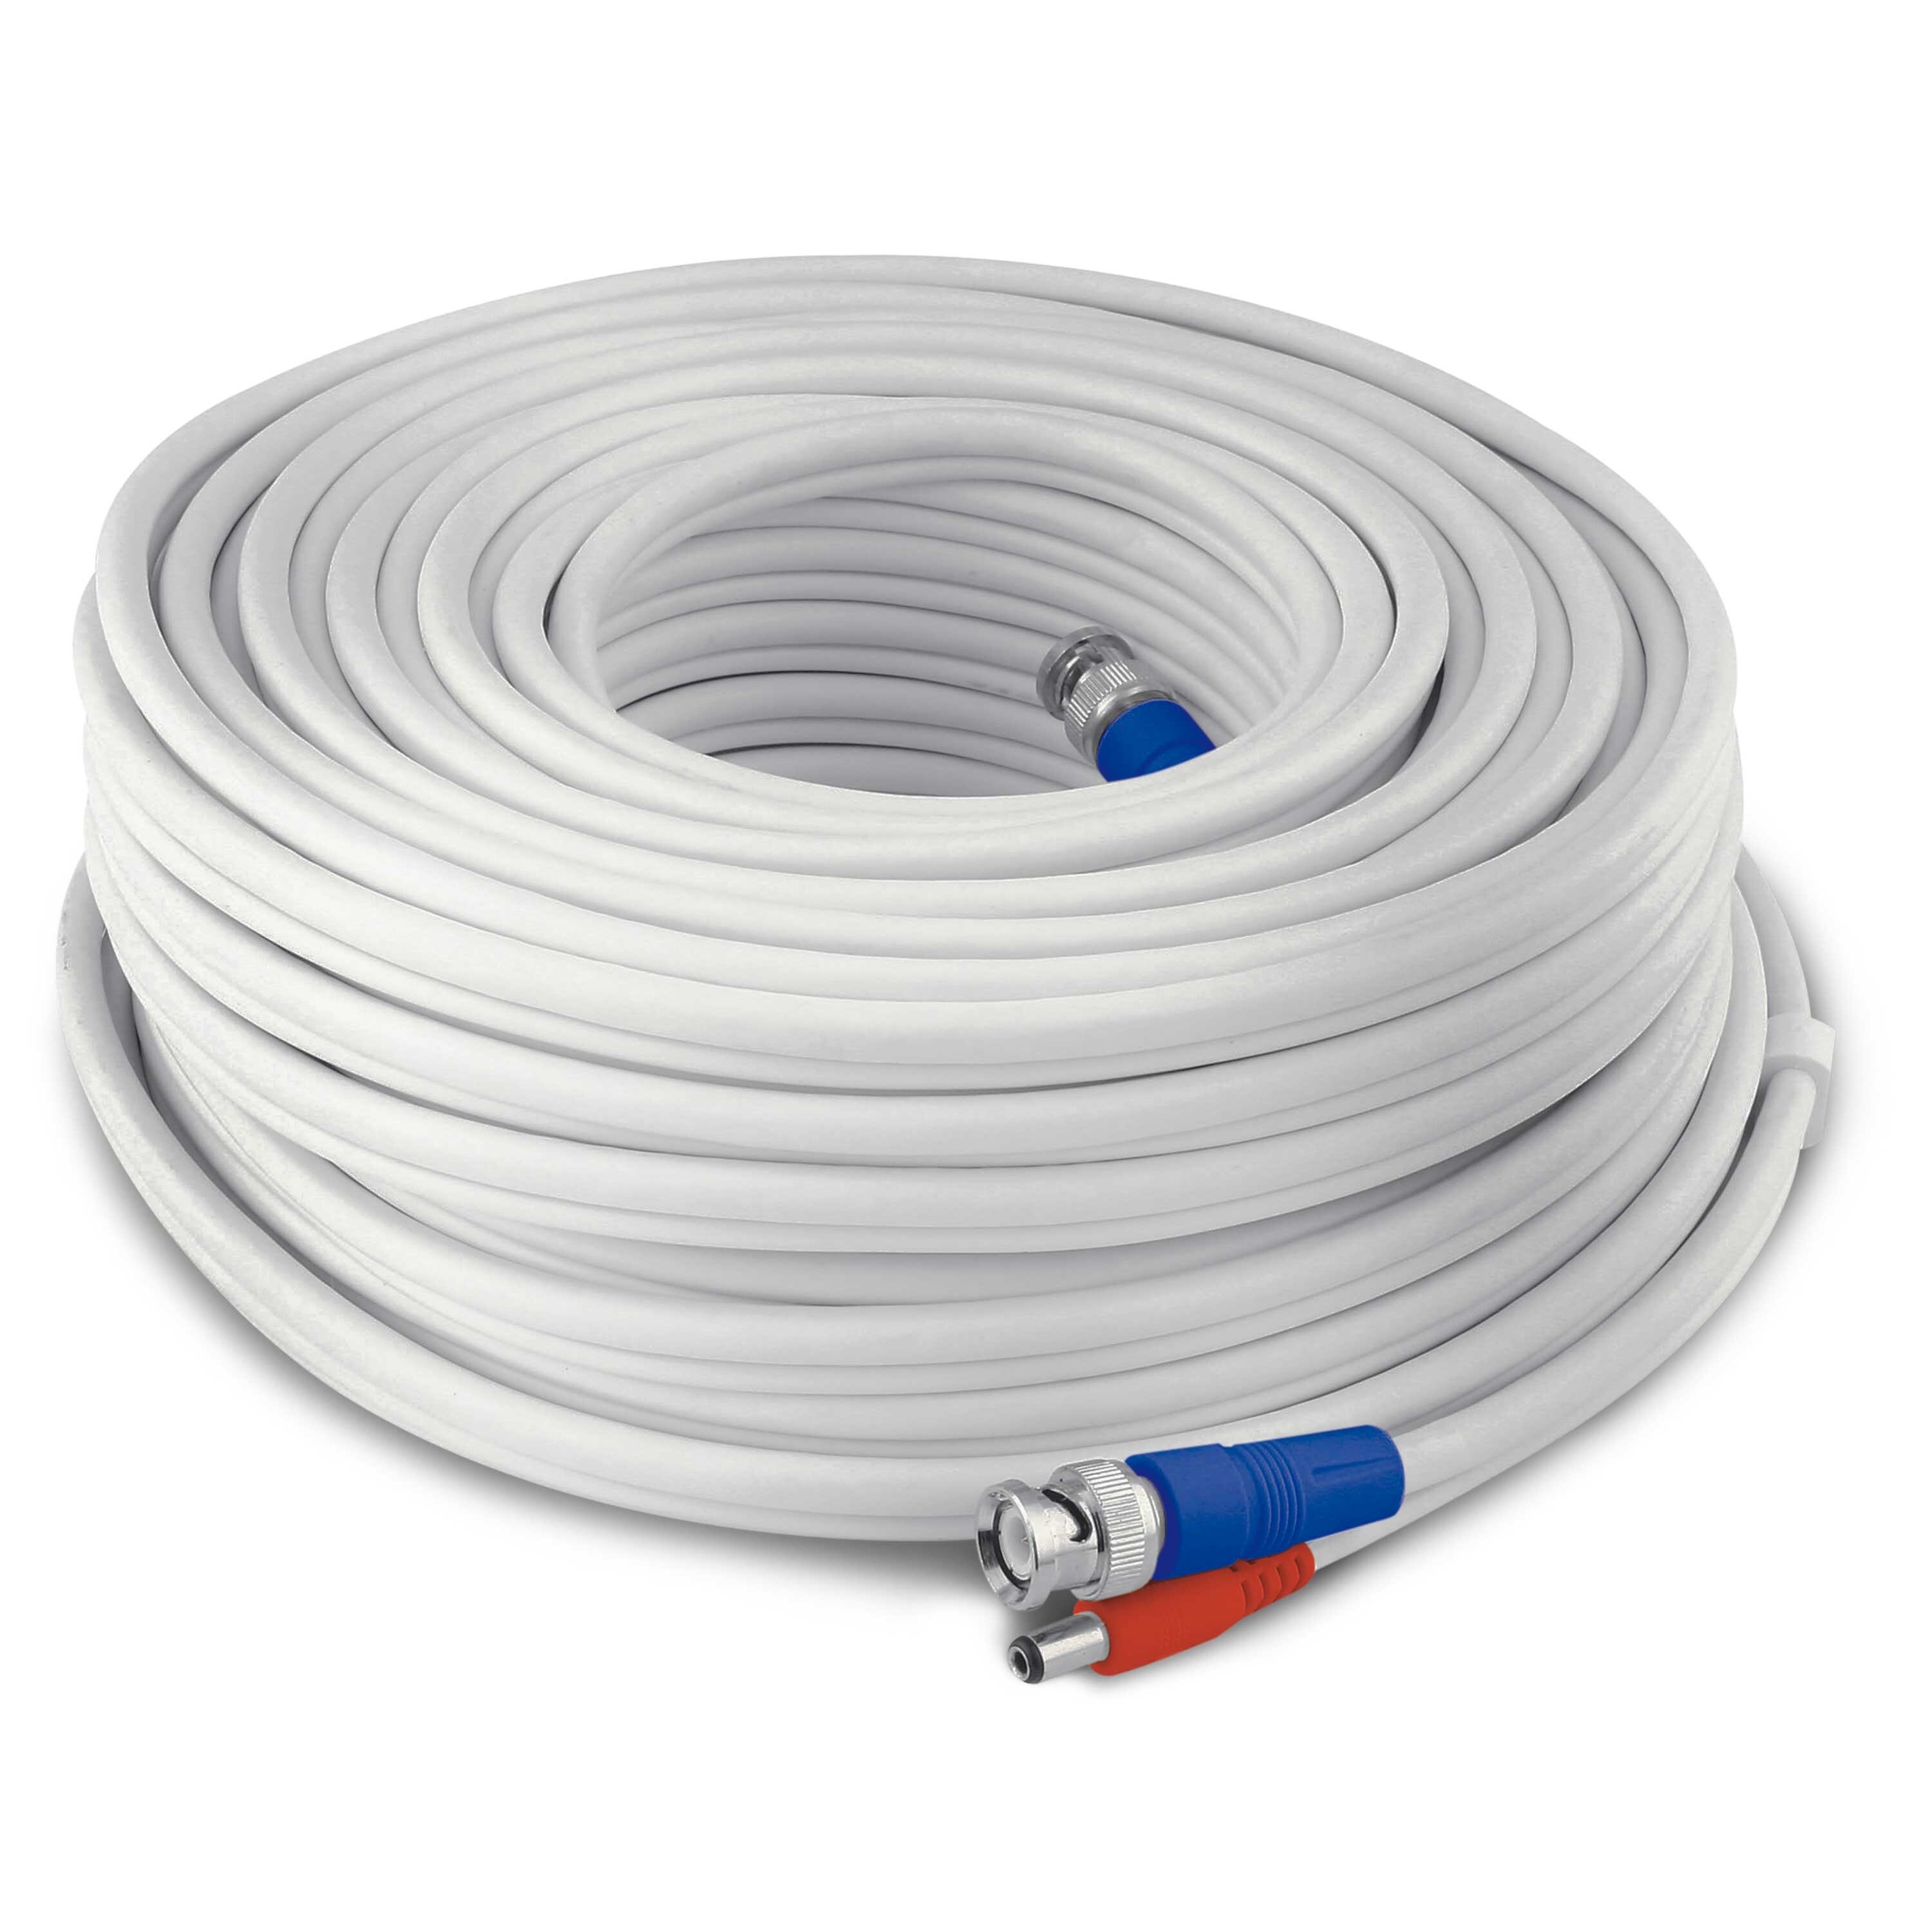 New High Quality White 100FT BNC CABLES For 24 CH SWANN 960H DVR SYSTEMS 